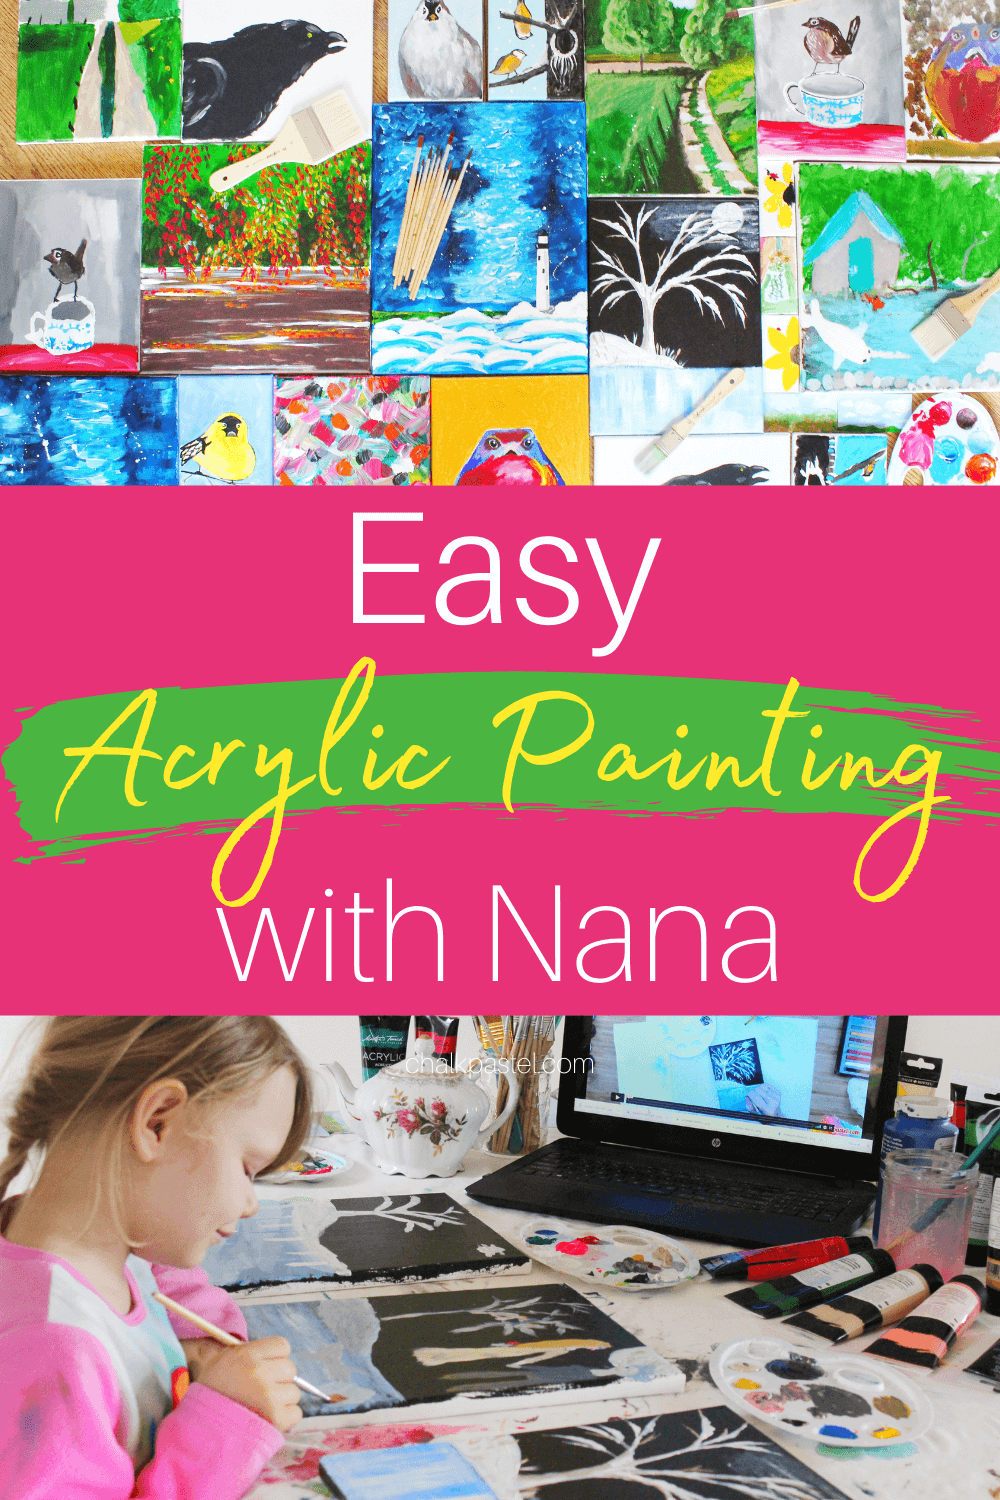 Easy Acrylic Painting with Nana - Let Nana help you as you embark on this easy acrylic painting journey. Learn some simple tips about color, and brush strokes. It's easier than you might expect! #easybeginneracrylics #easypaintinglessonsforkids #paintingideas #acrylicpainting #easybeginneracrylics #easyacrylicpainting #acrylicpaintingideas #simpleacrylicpaintings #acrylicartlessons #acrylicswithNana #easyacrylicpaintingwithNana #acrylicpaintlessons